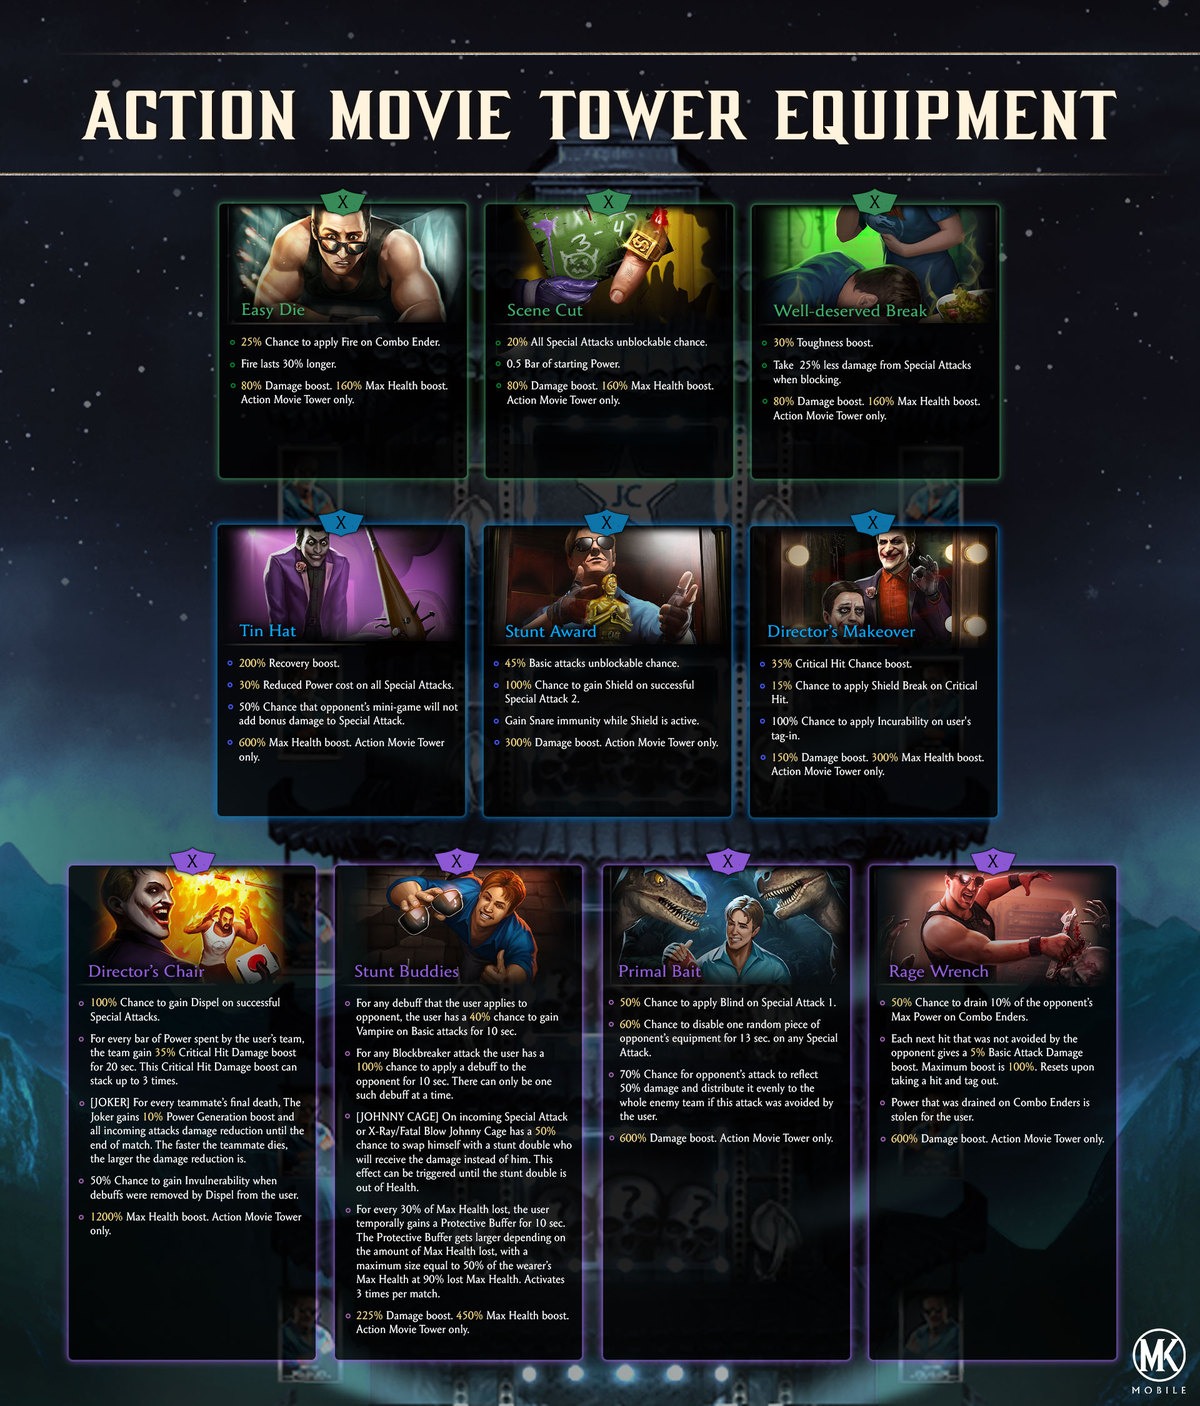 MKM Action Movie Tower Equipment